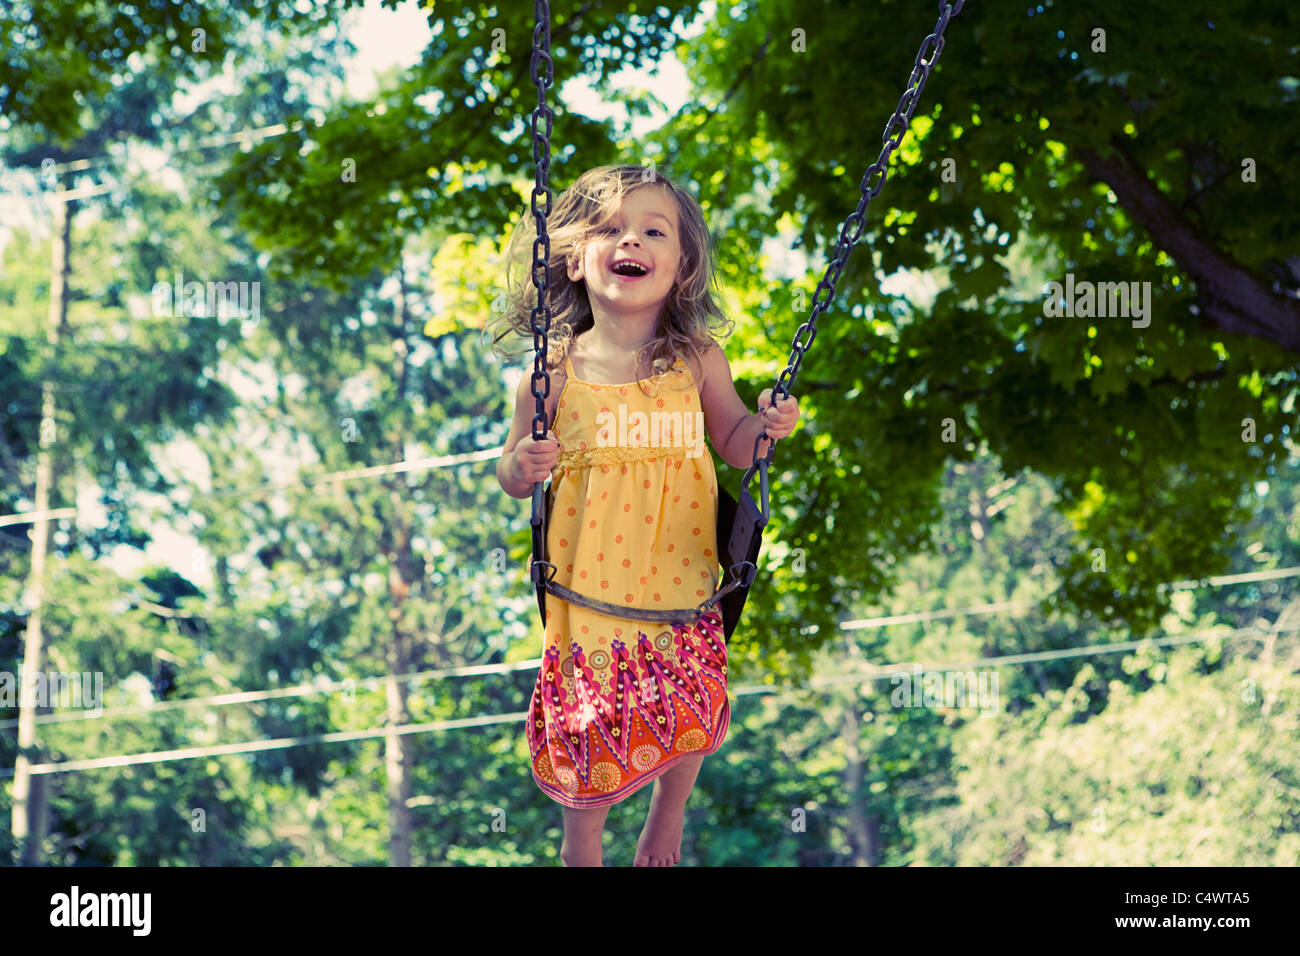 USA,Michigan,Charlevoix,Girl (2-3) on swing in playground Banque D'Images